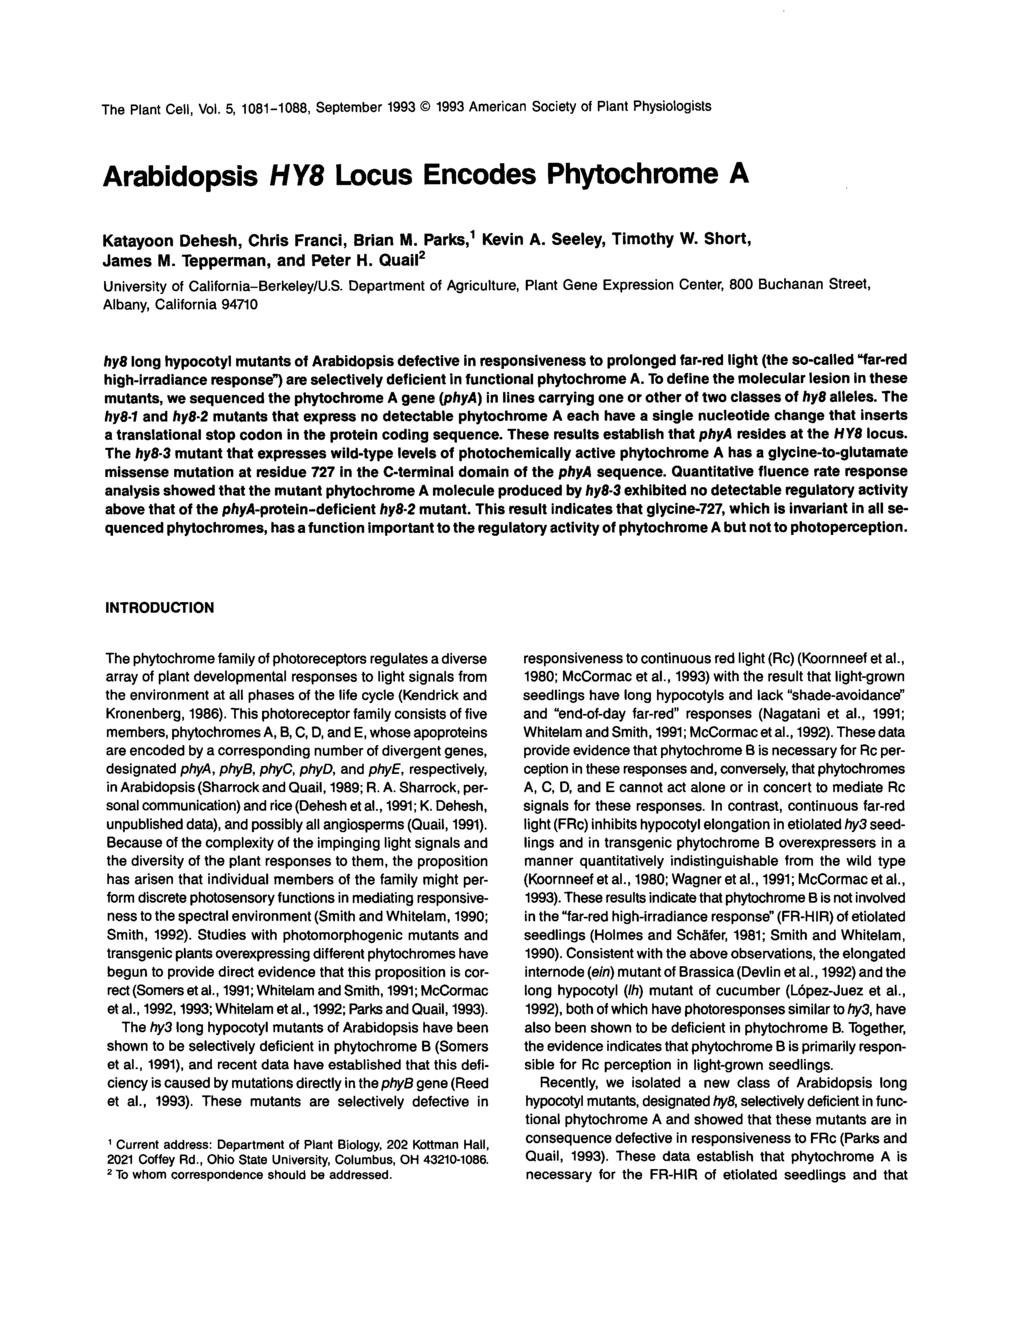 The Plant Cell, Vol. 5, 1081-1088, September 1993 @ 1993 American Society of Plant Physiologists Arabidopsis HY8 Locus Encodes Phytochrome A Katayoon Dehesh, Chris Franci, Brian M. Parks, Kevin A.